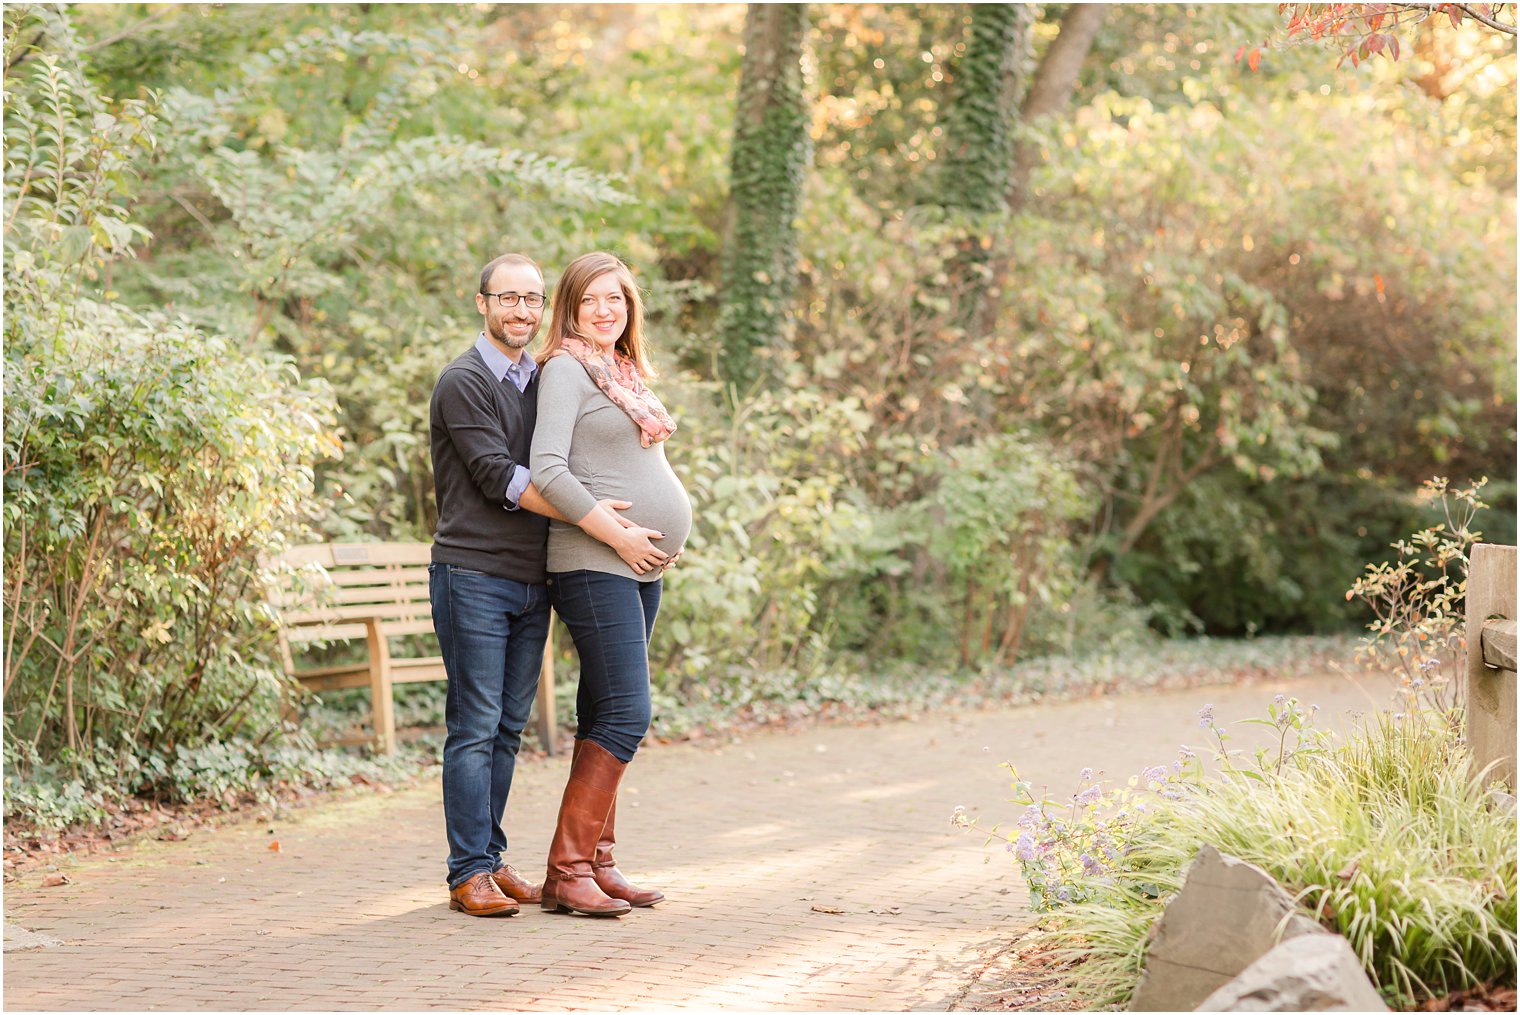 Classic pose for maternity session